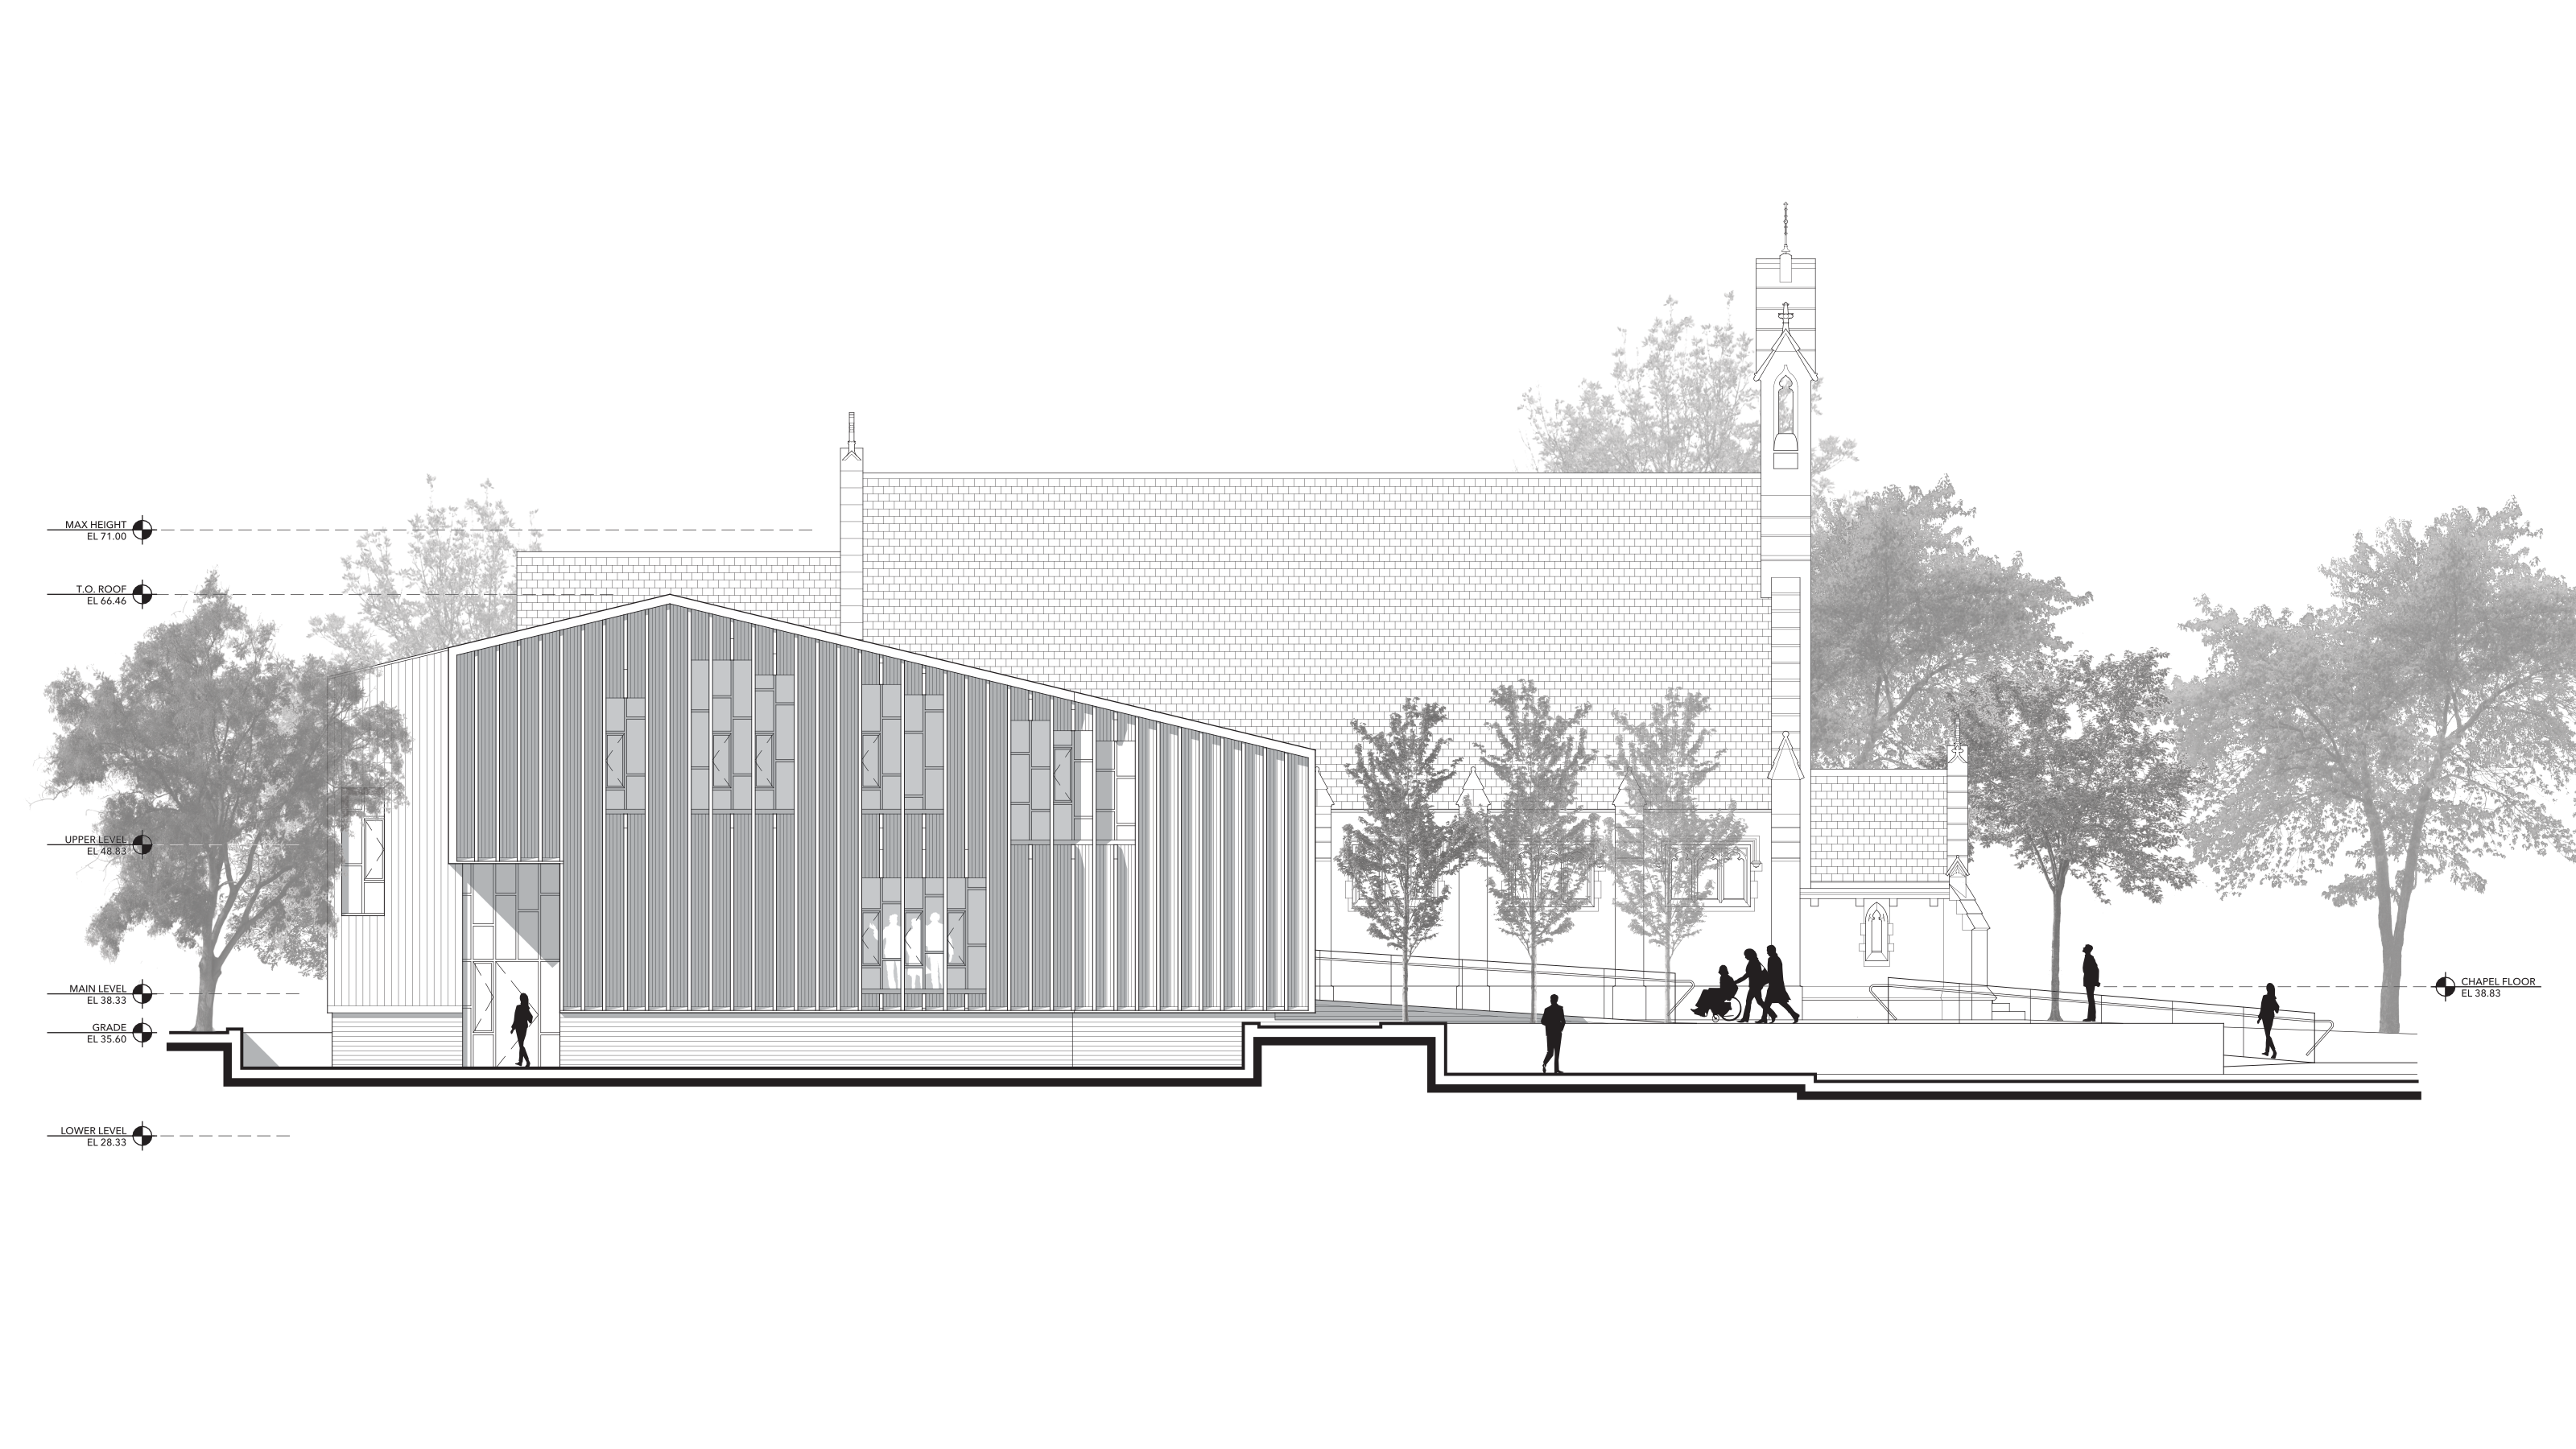 North elevation of new annex with Swedenborg Chapel behind